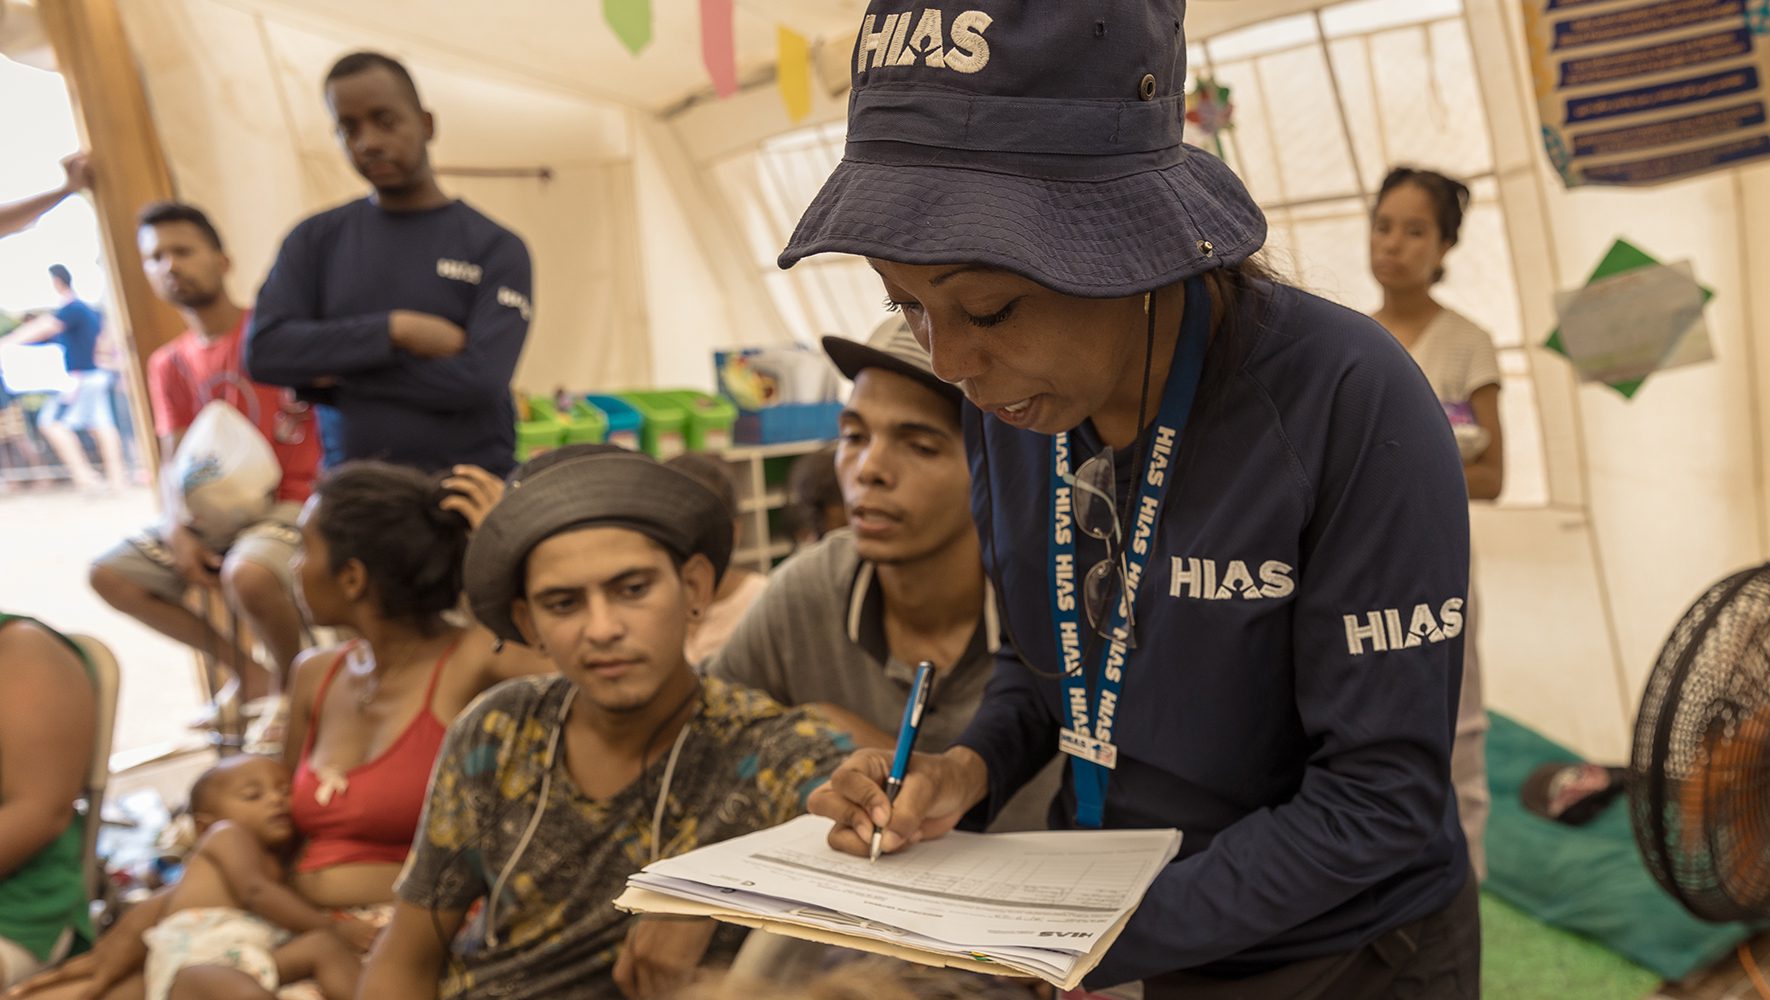 HIAS staff member Dilsa Sanchez gives personal supplies to migrants at the HIAS support tent in Migration Reception Center of Lajas Blancas, Panama. | In the Darien Gap, Refugees Find Help All Along the Way | HIAS